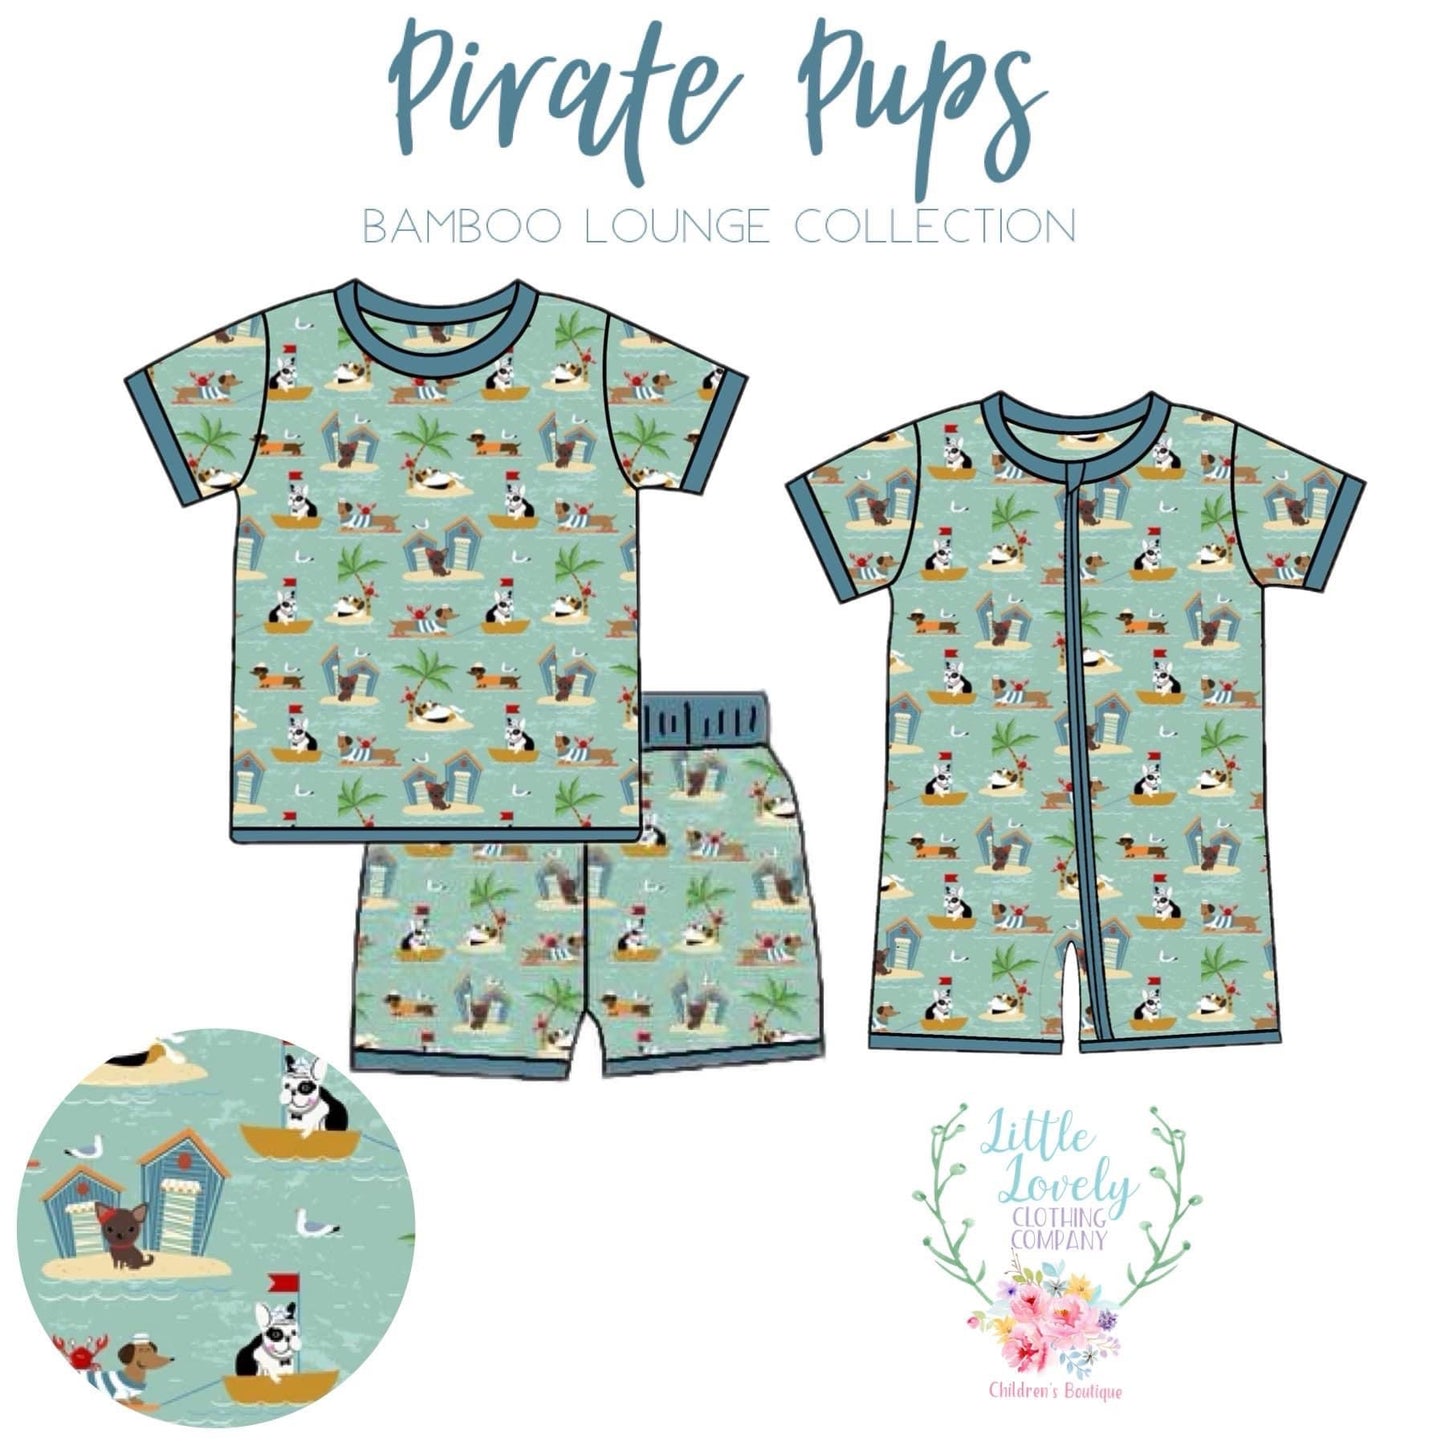 Pirate Pups Bamboo Lounge Collection Presale ETA Late April to LLCCO then to Customers